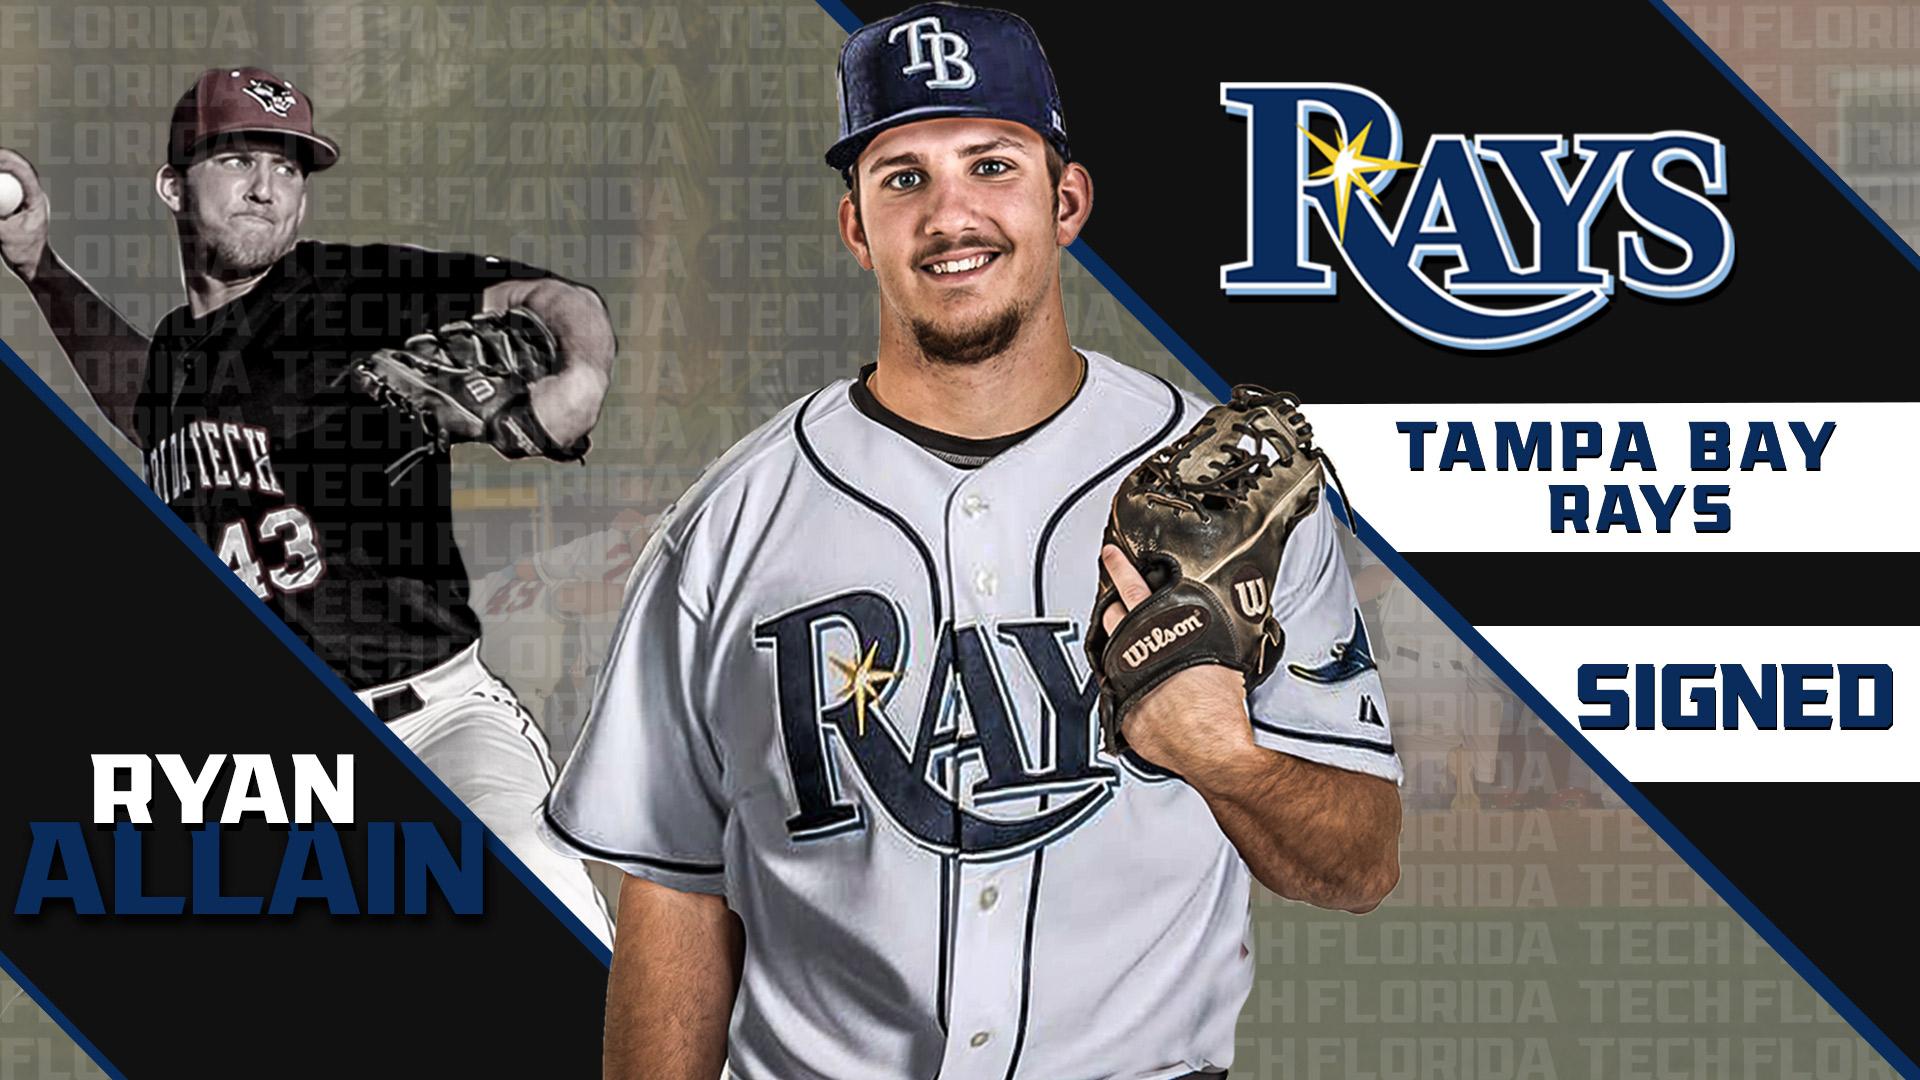 Ryan Allain Signs with Tampa Bay Rays Tech Panthers